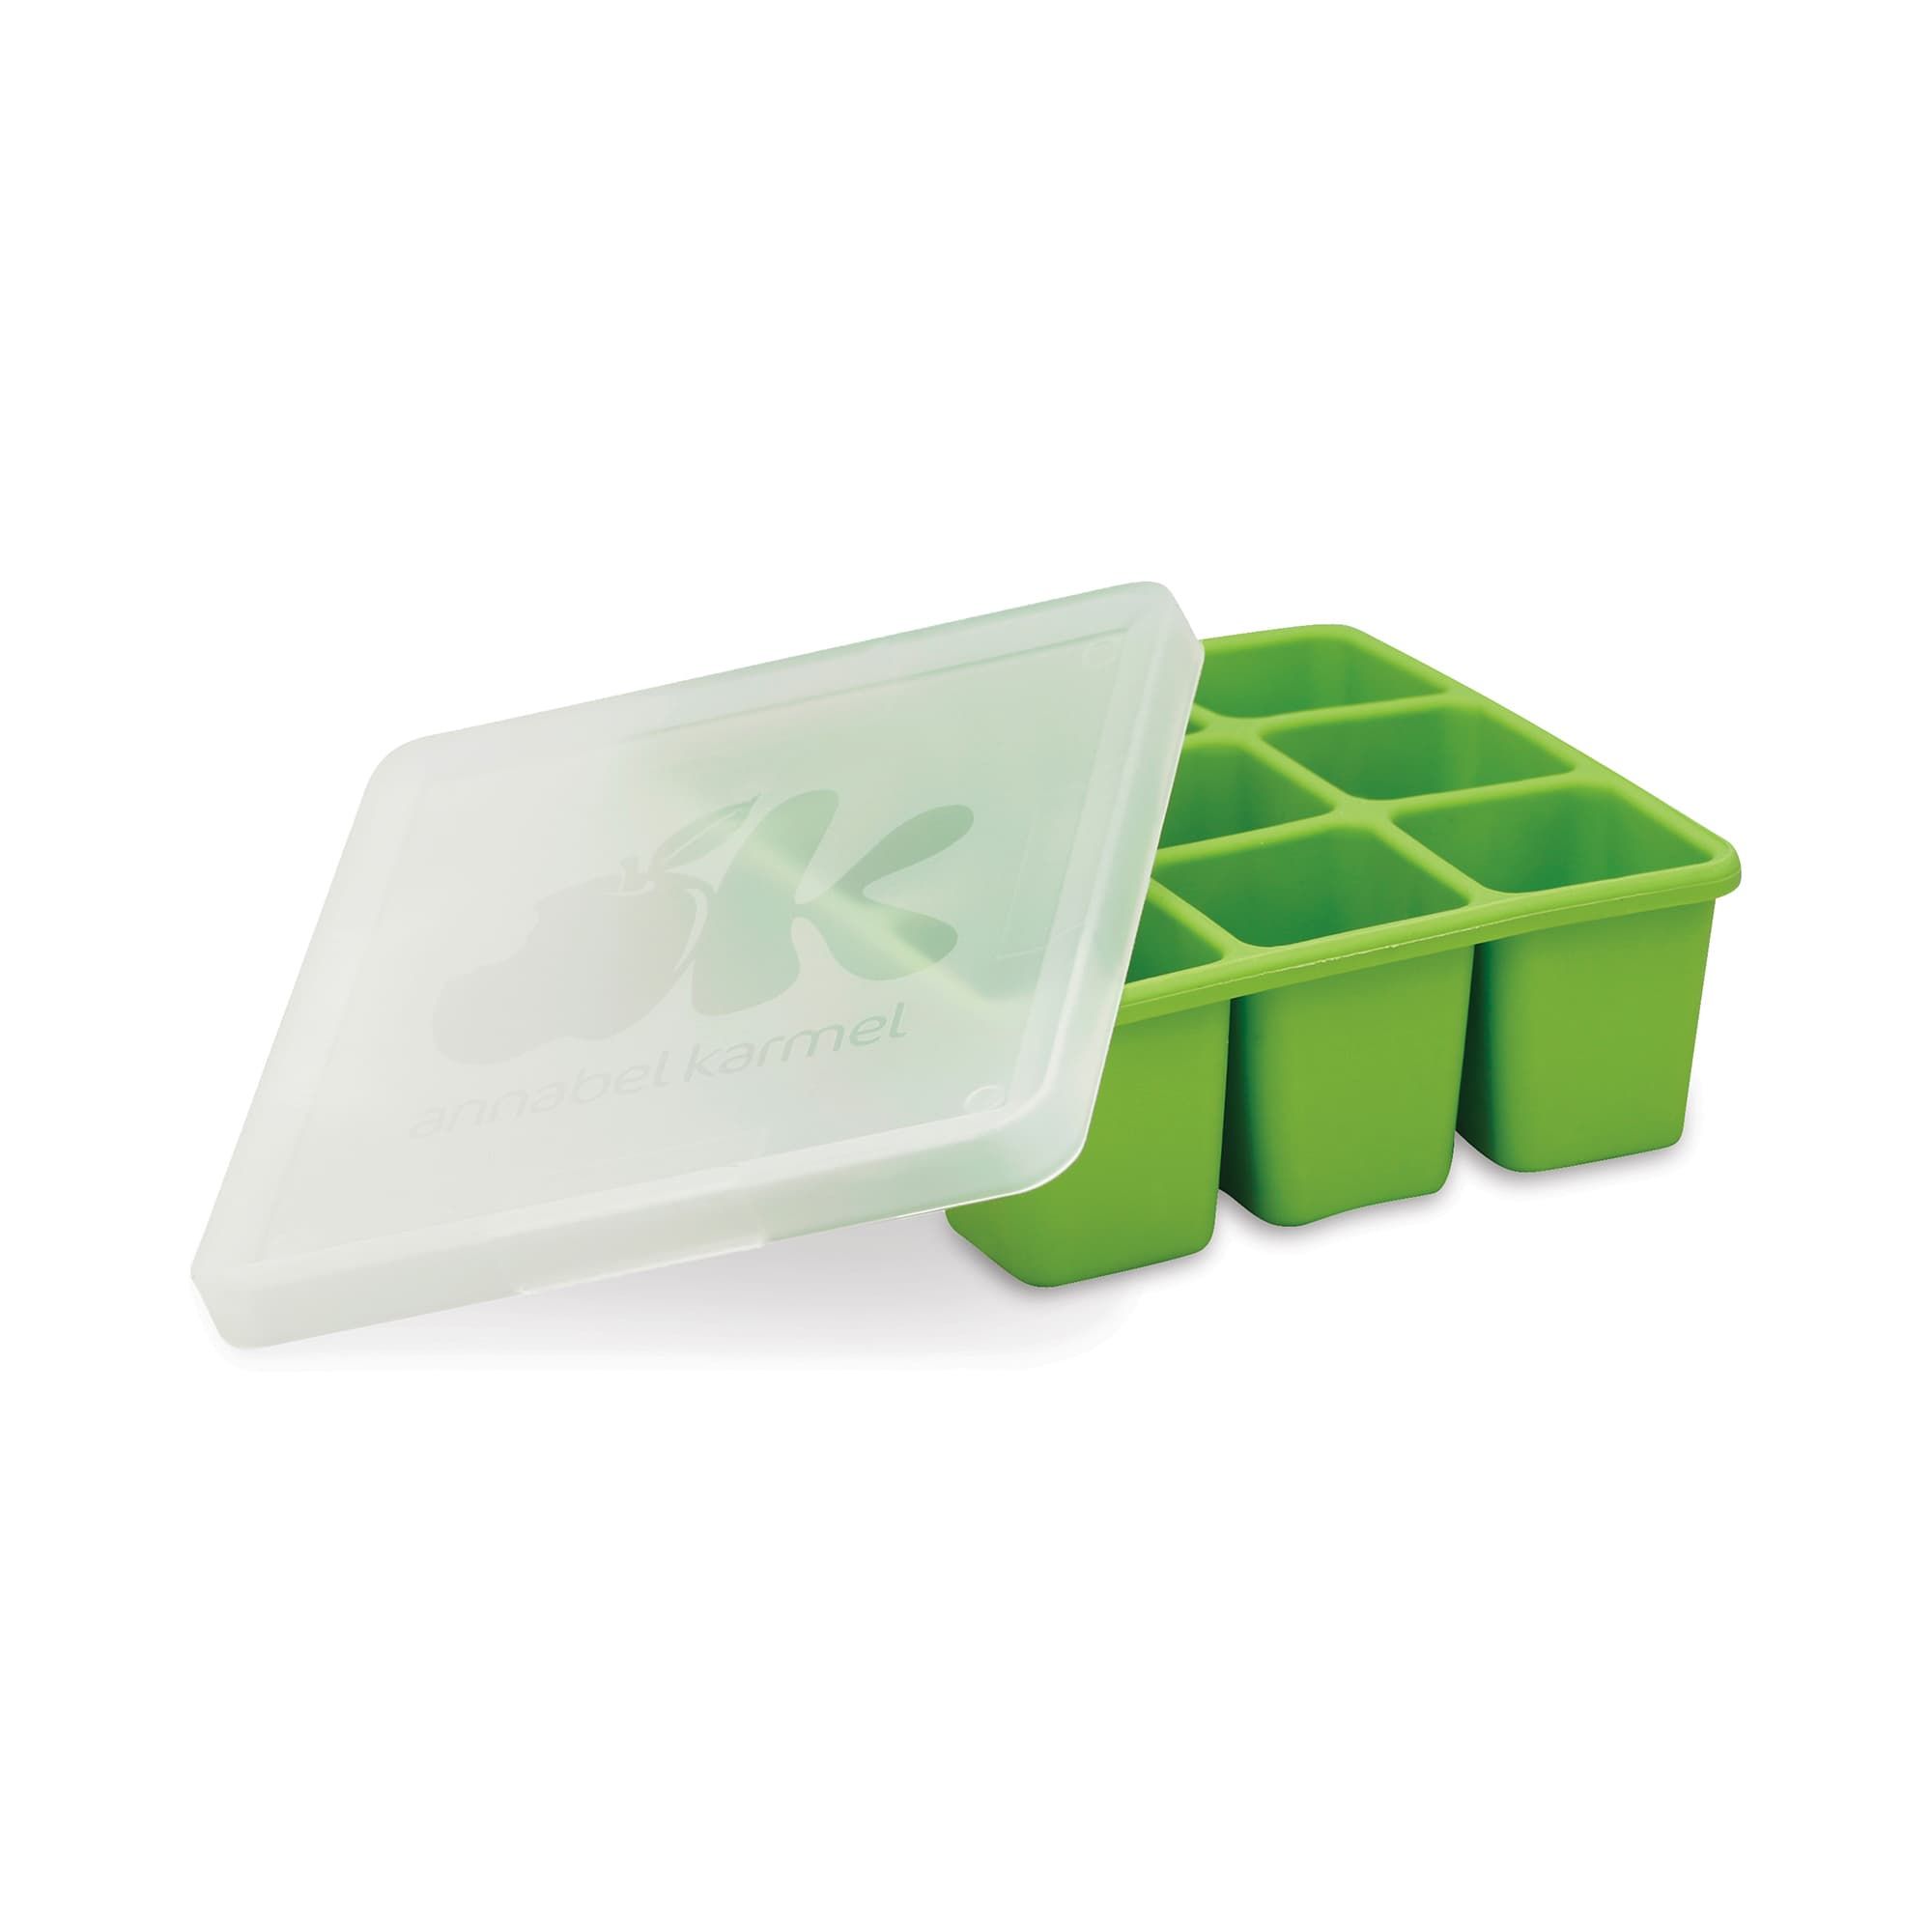 NUK Silicone Baby Food Freezer Tray, Green - image 1 of 6